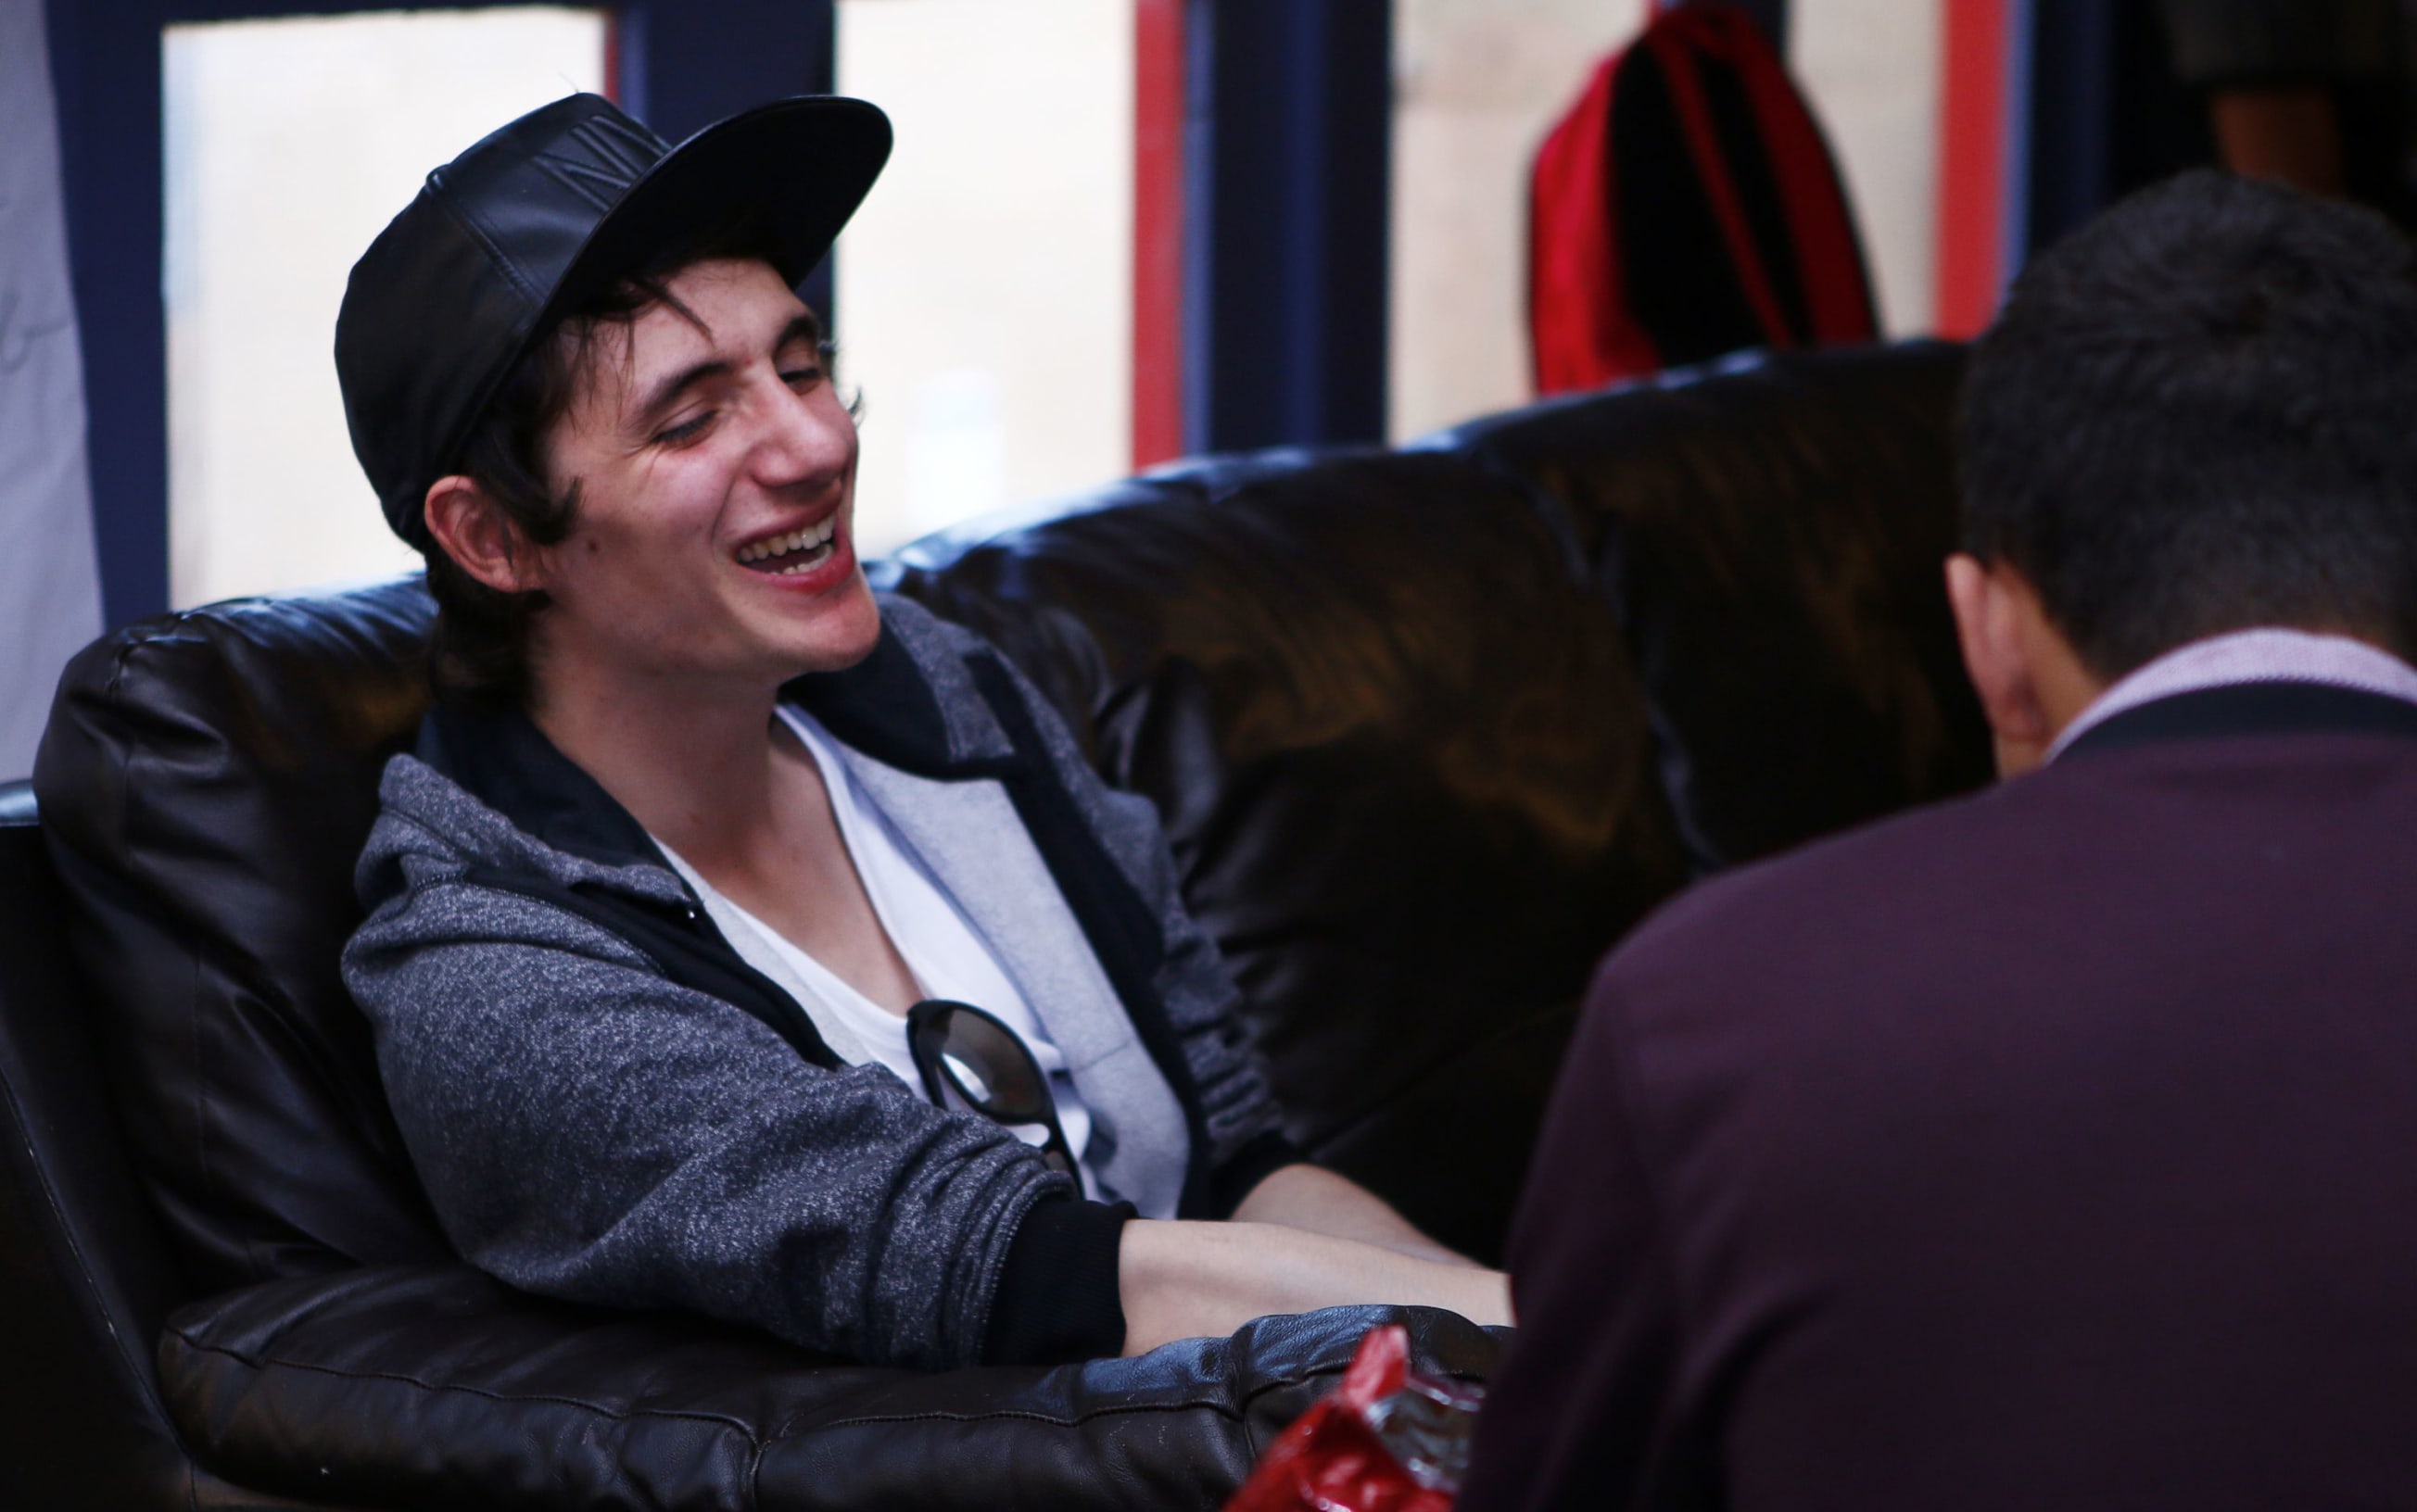 A happy young man sitting on a sofa, talking with someone facing away from the camera